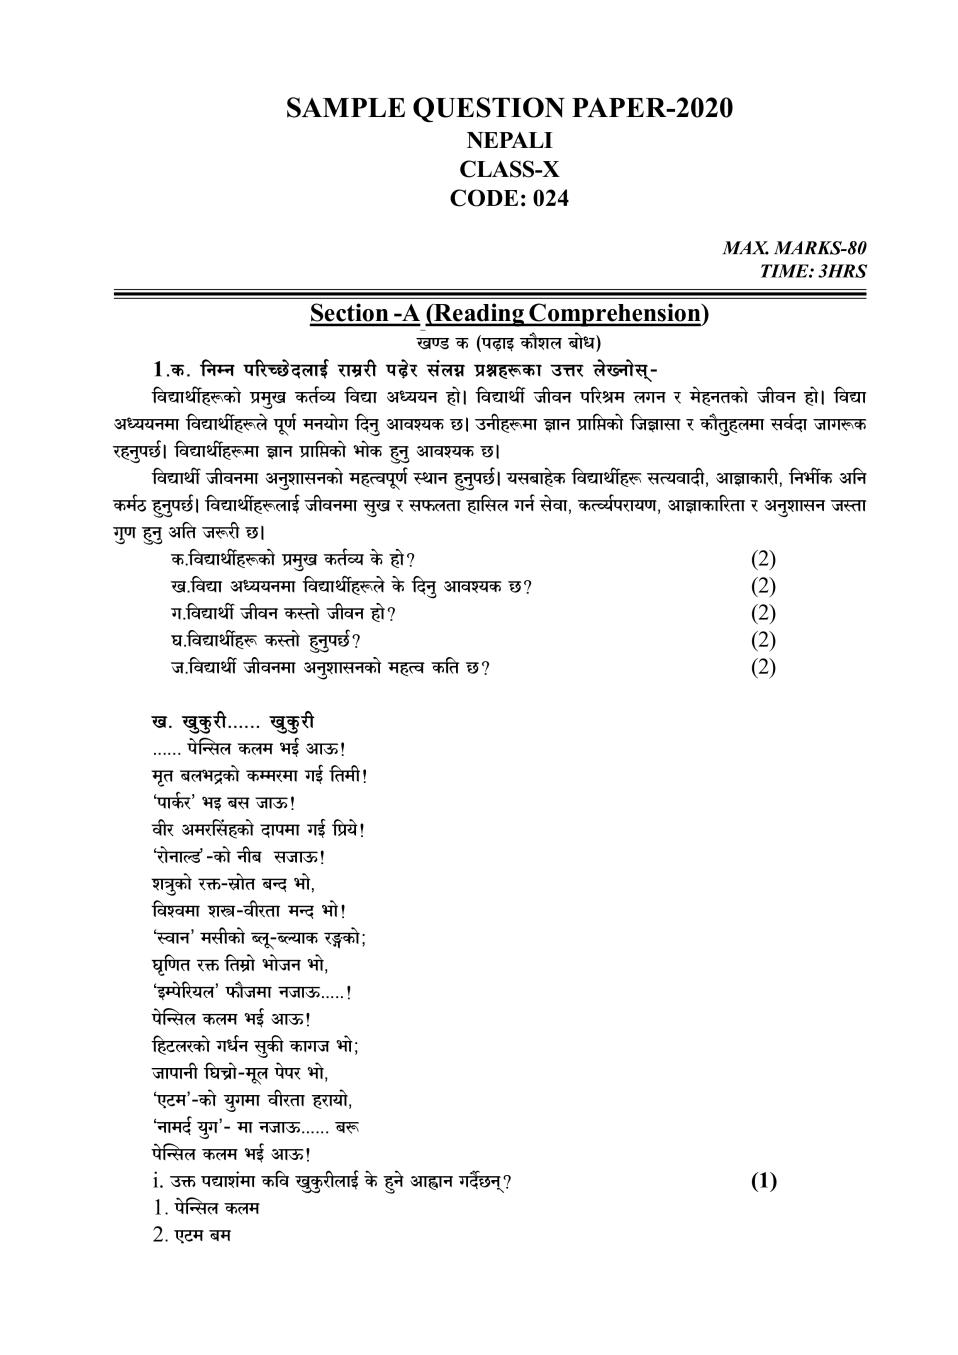 CBSE Class 10 Sample Paper 2020 for Nepali - Page 1